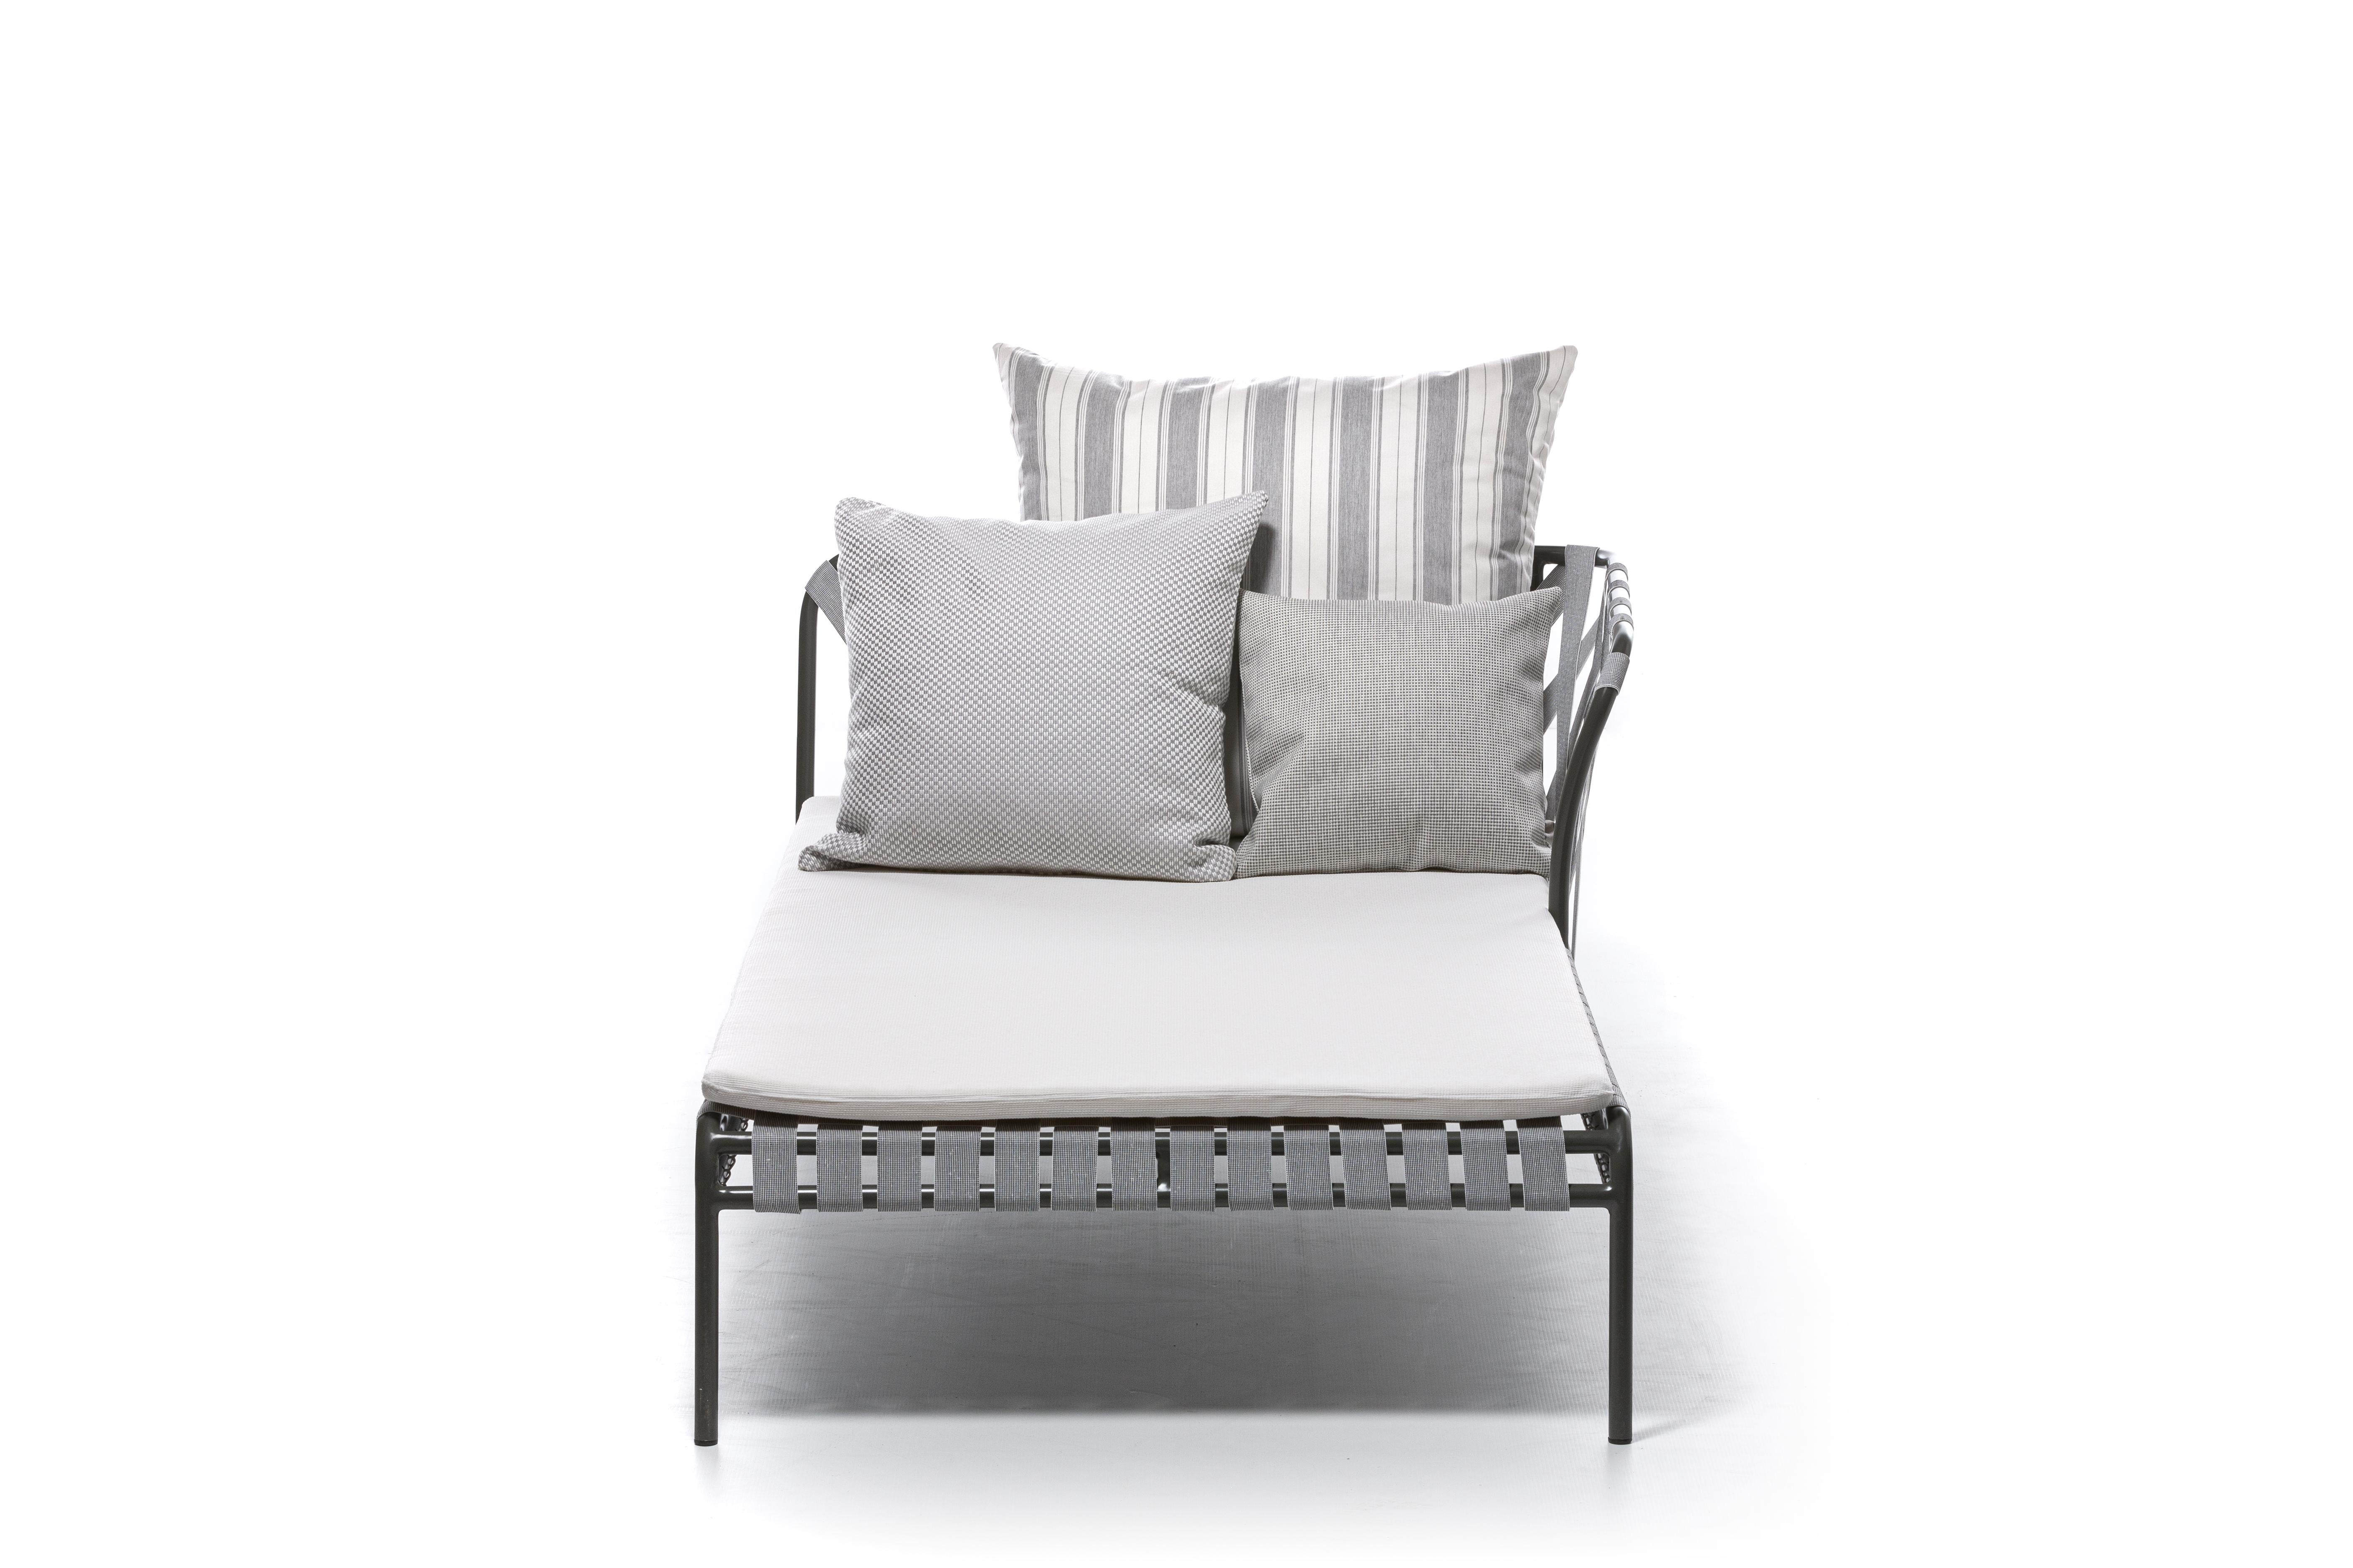 The Inout 852/853 sofas and Inout 858/859 dormeuses develop around a light structure in white, grey or sage painted tubular aluminium, an ecological material, unique for its technical qualities. To this is added a particular weave in grey, black or